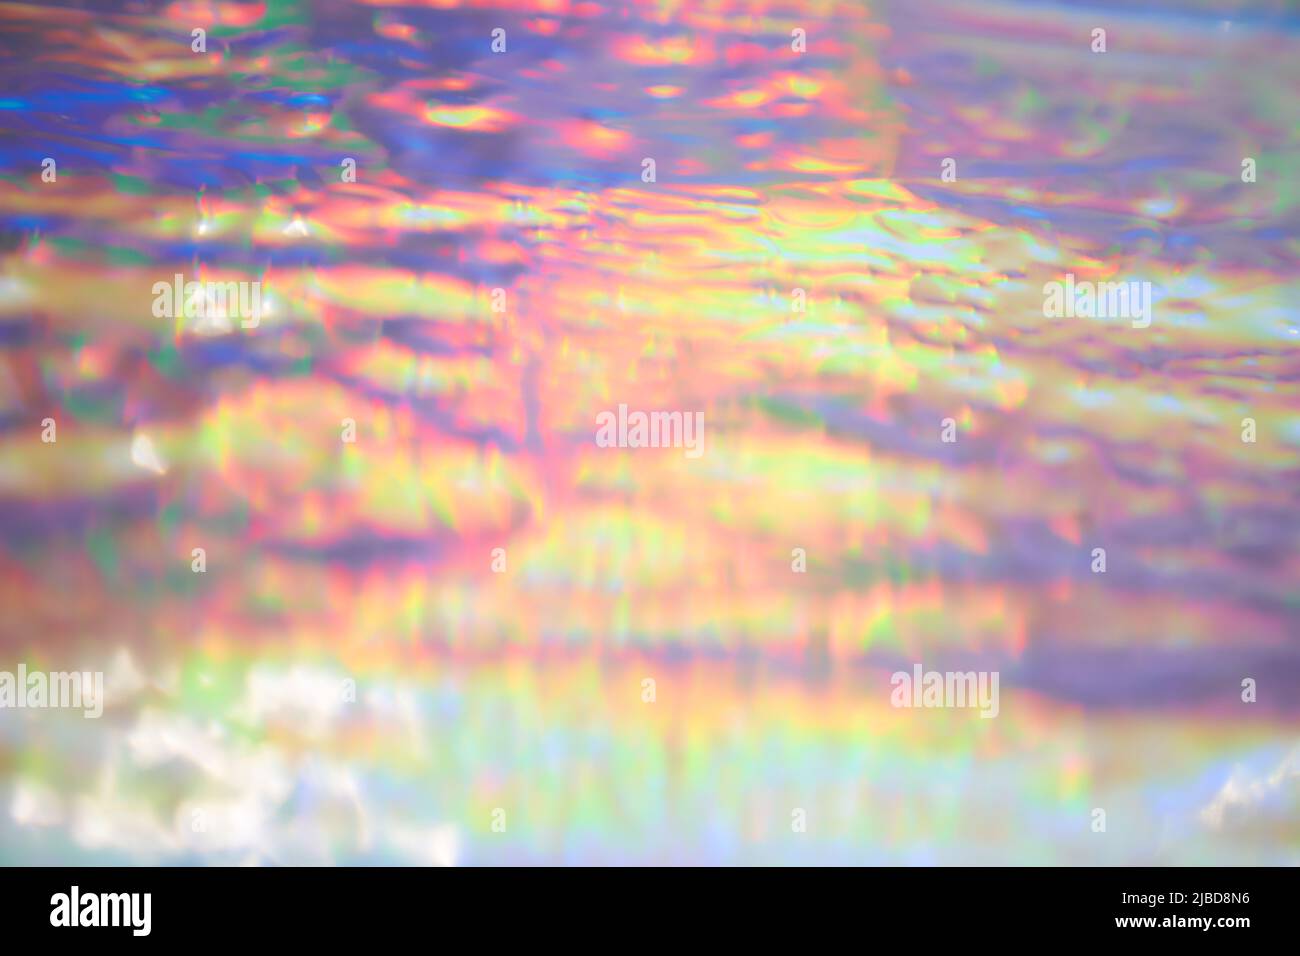 Holographic iridescent background wrinkled wavy abstract rainbow blurred background. Surface with multiple colors of webpunk in 90's style. High quality photo Stock Photo